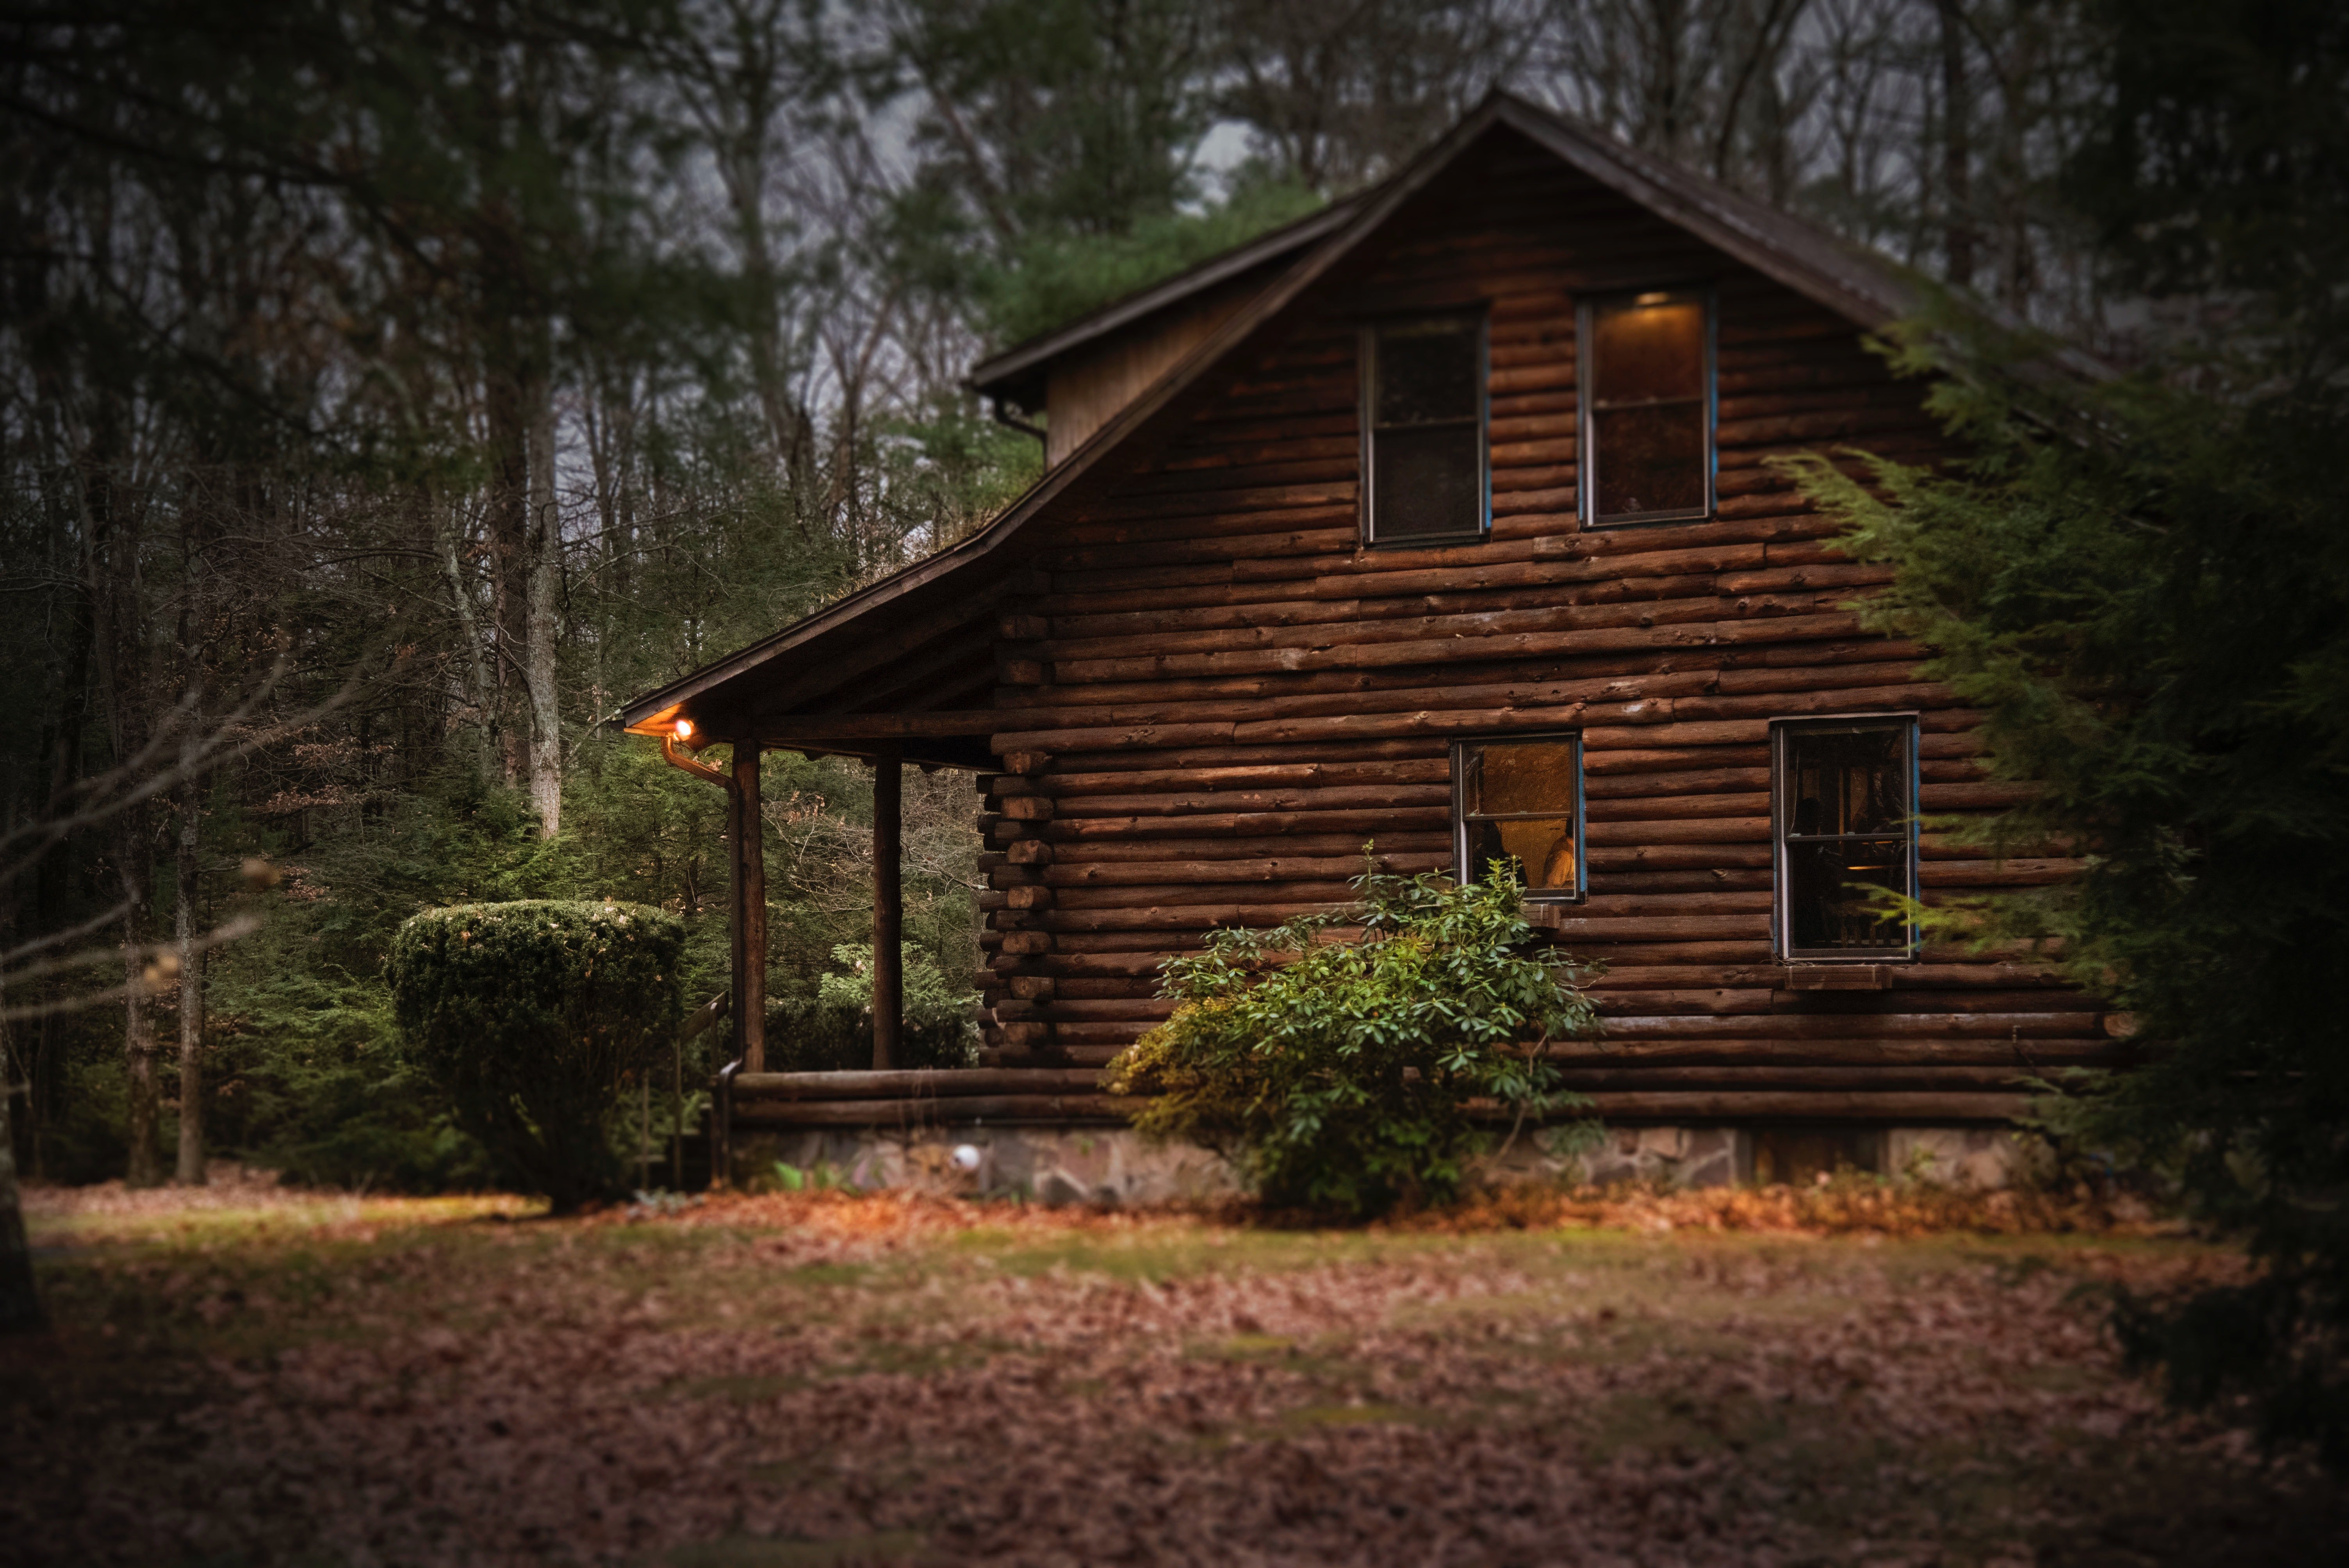 Pictured - A brown cabin in the woods | Source: Pexels 